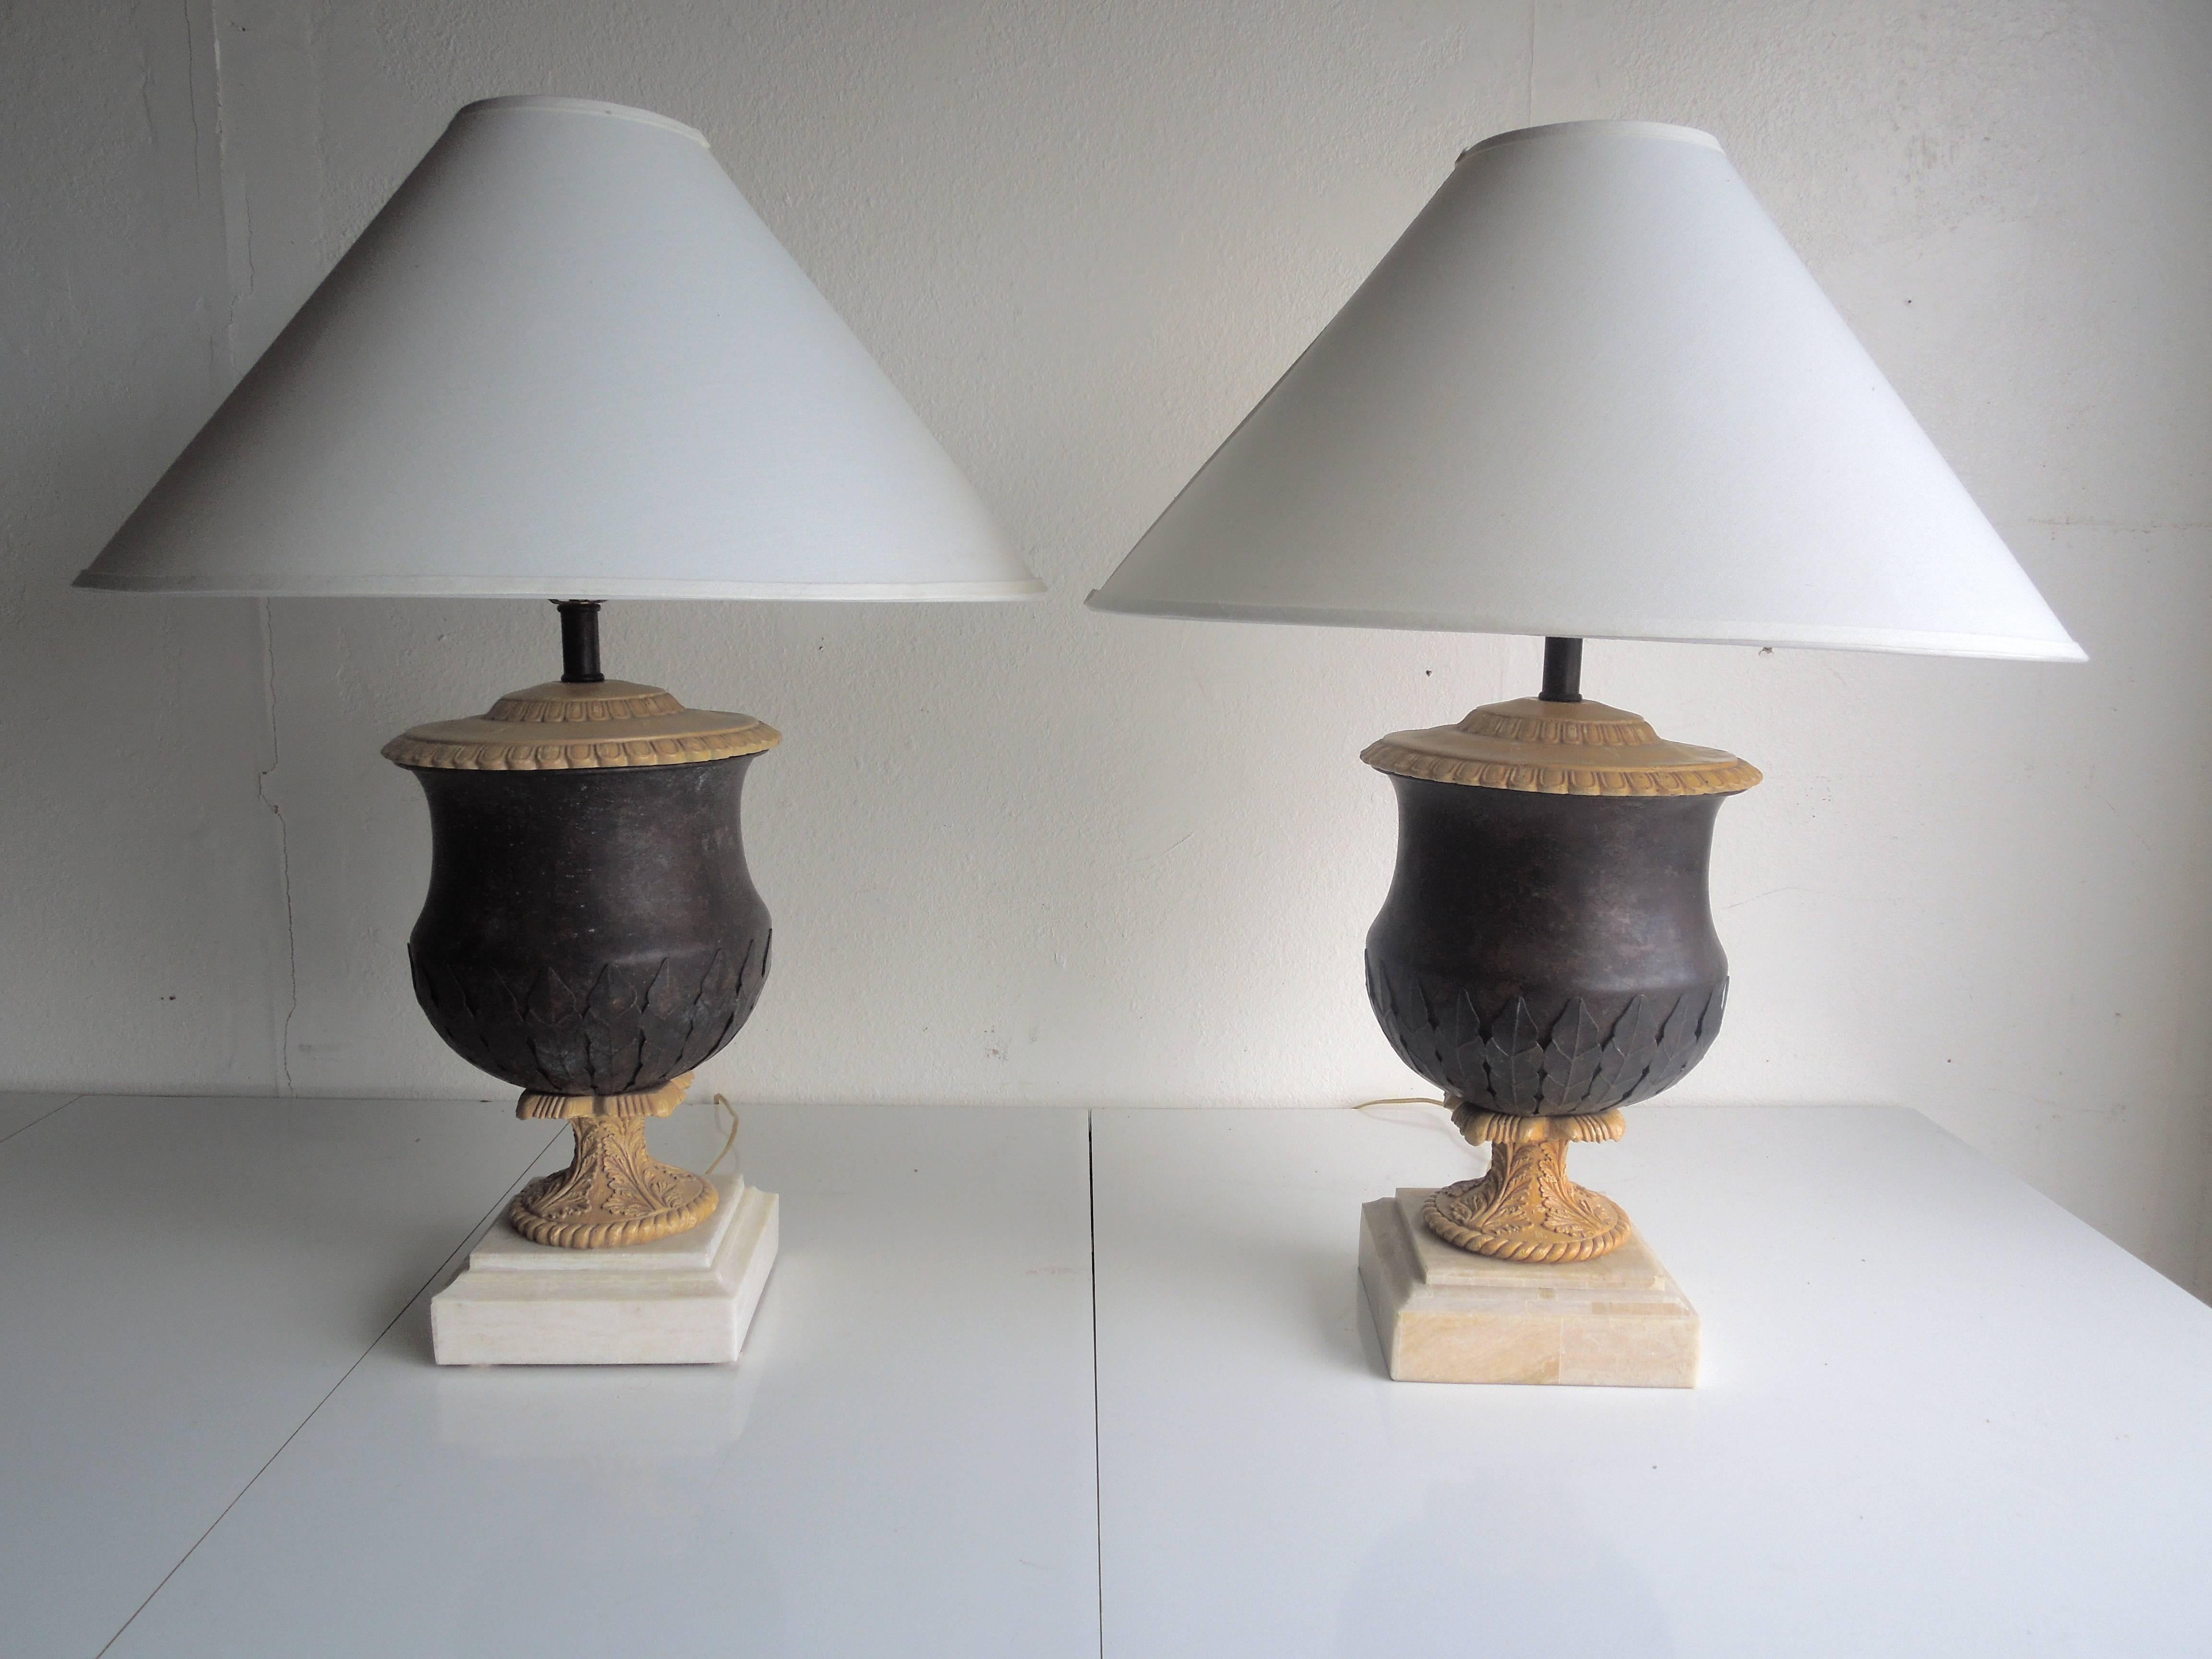 From a very special Palm Springs estate entirely designed by Kreiss in the 1980s, a pair of handmade lamps with metal urns that have a leaf design and marble bases. Lamps obtain Kreiss labels, handmade in the Philippines. The hand done patina is a